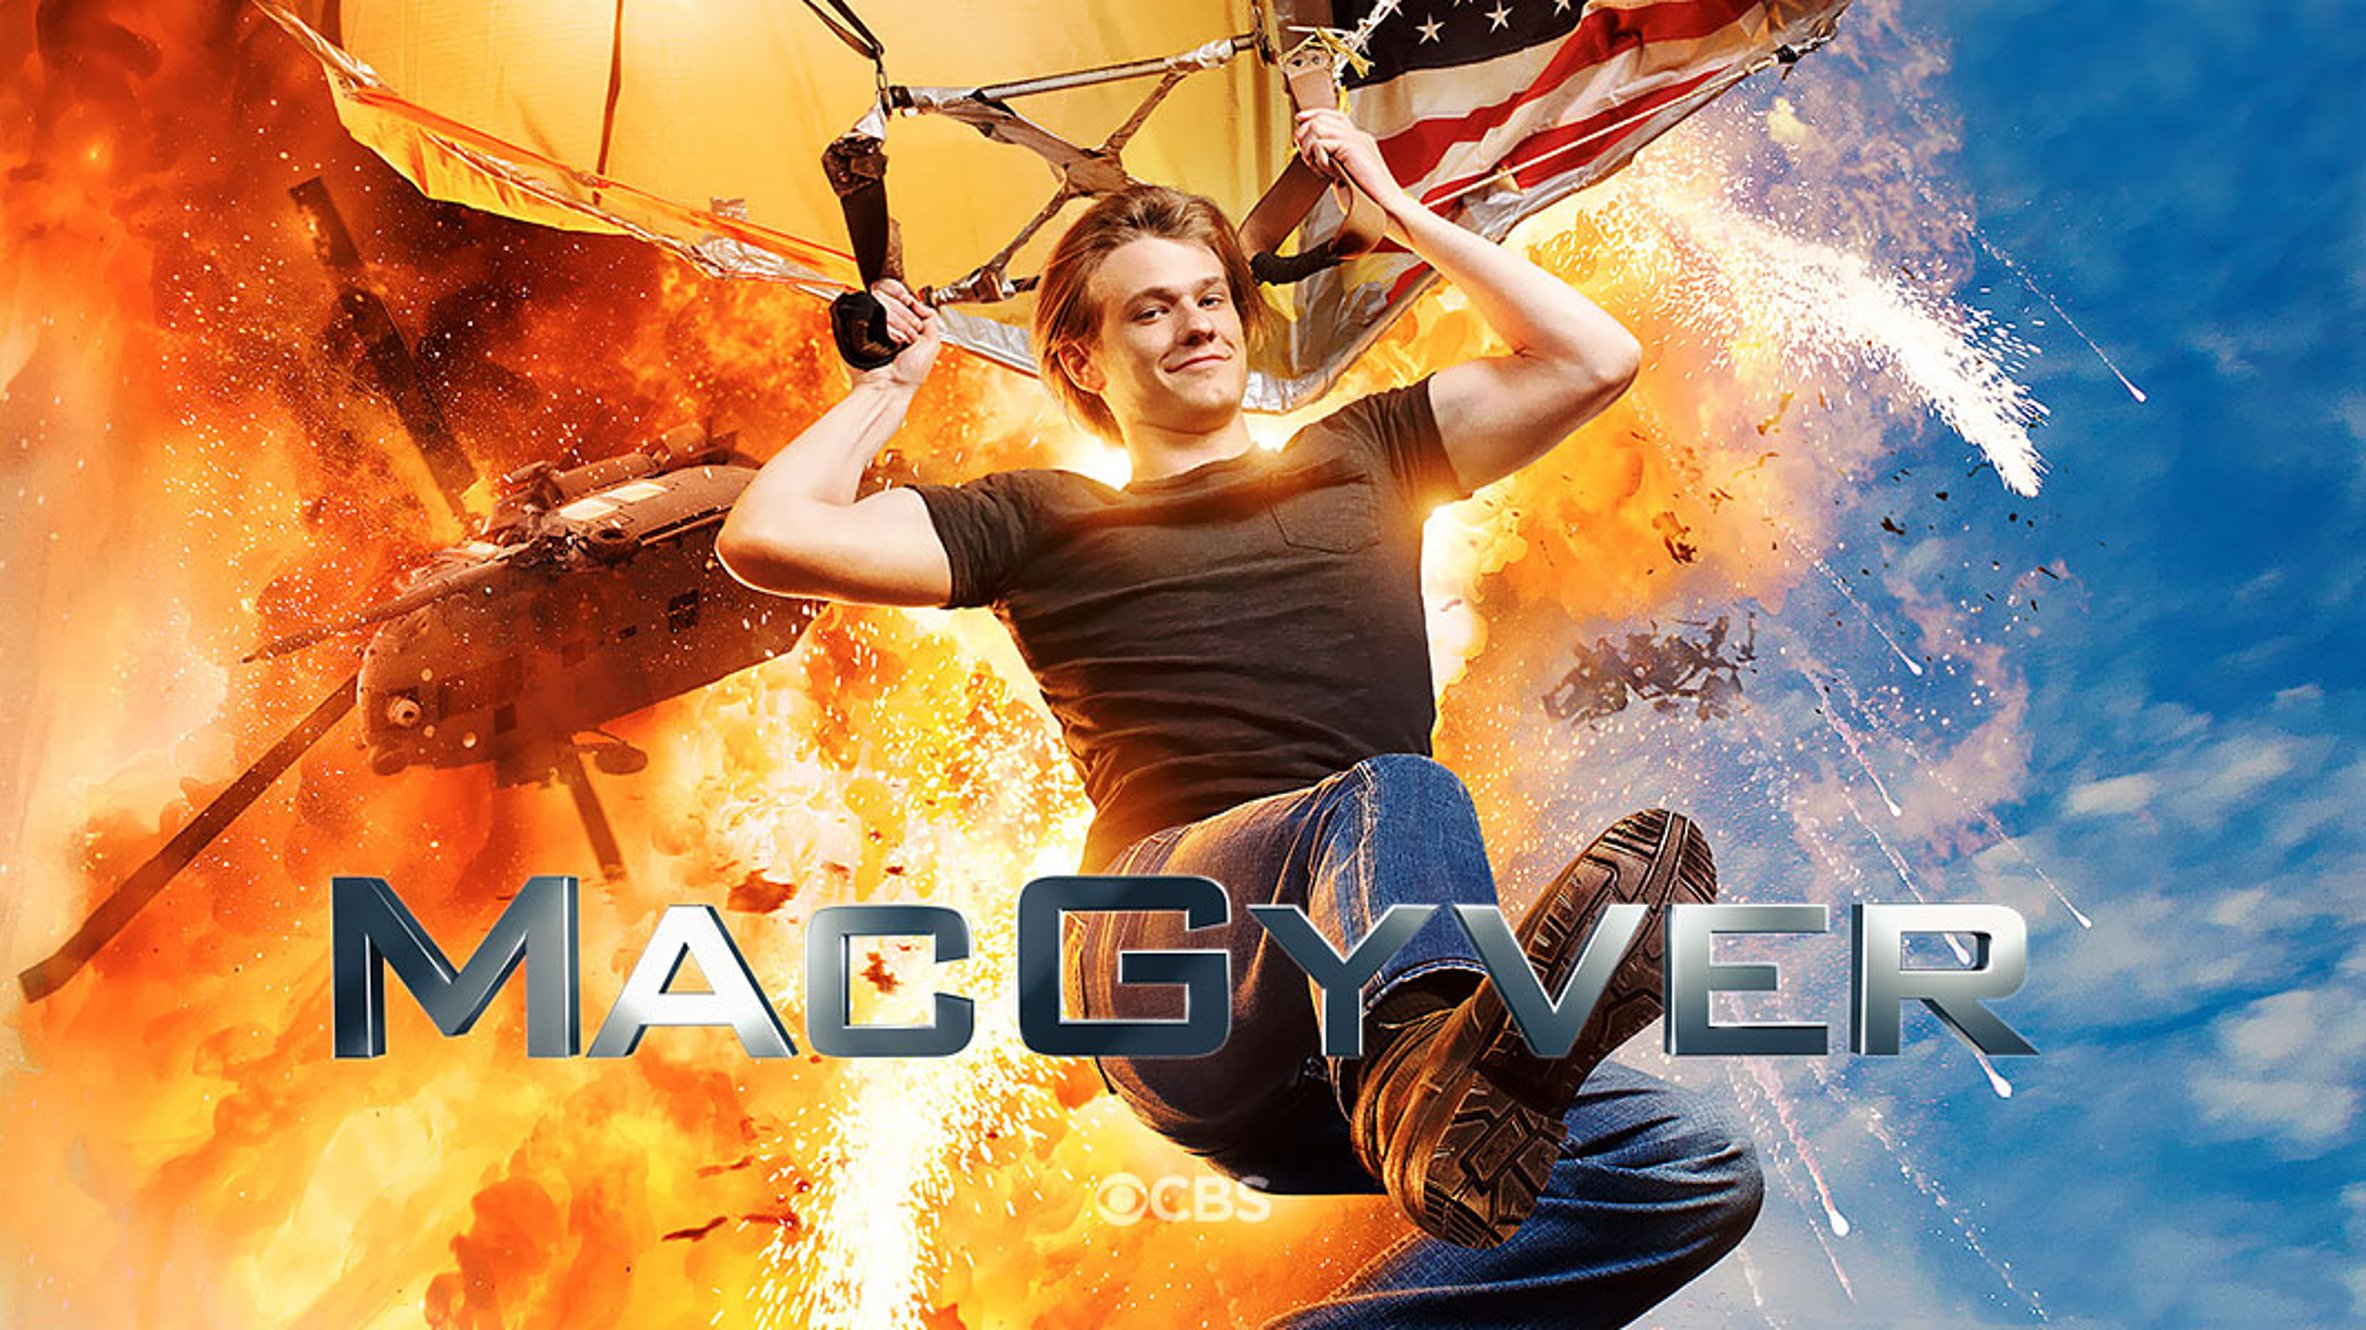 Casting for the CBS TV series MacGyver!